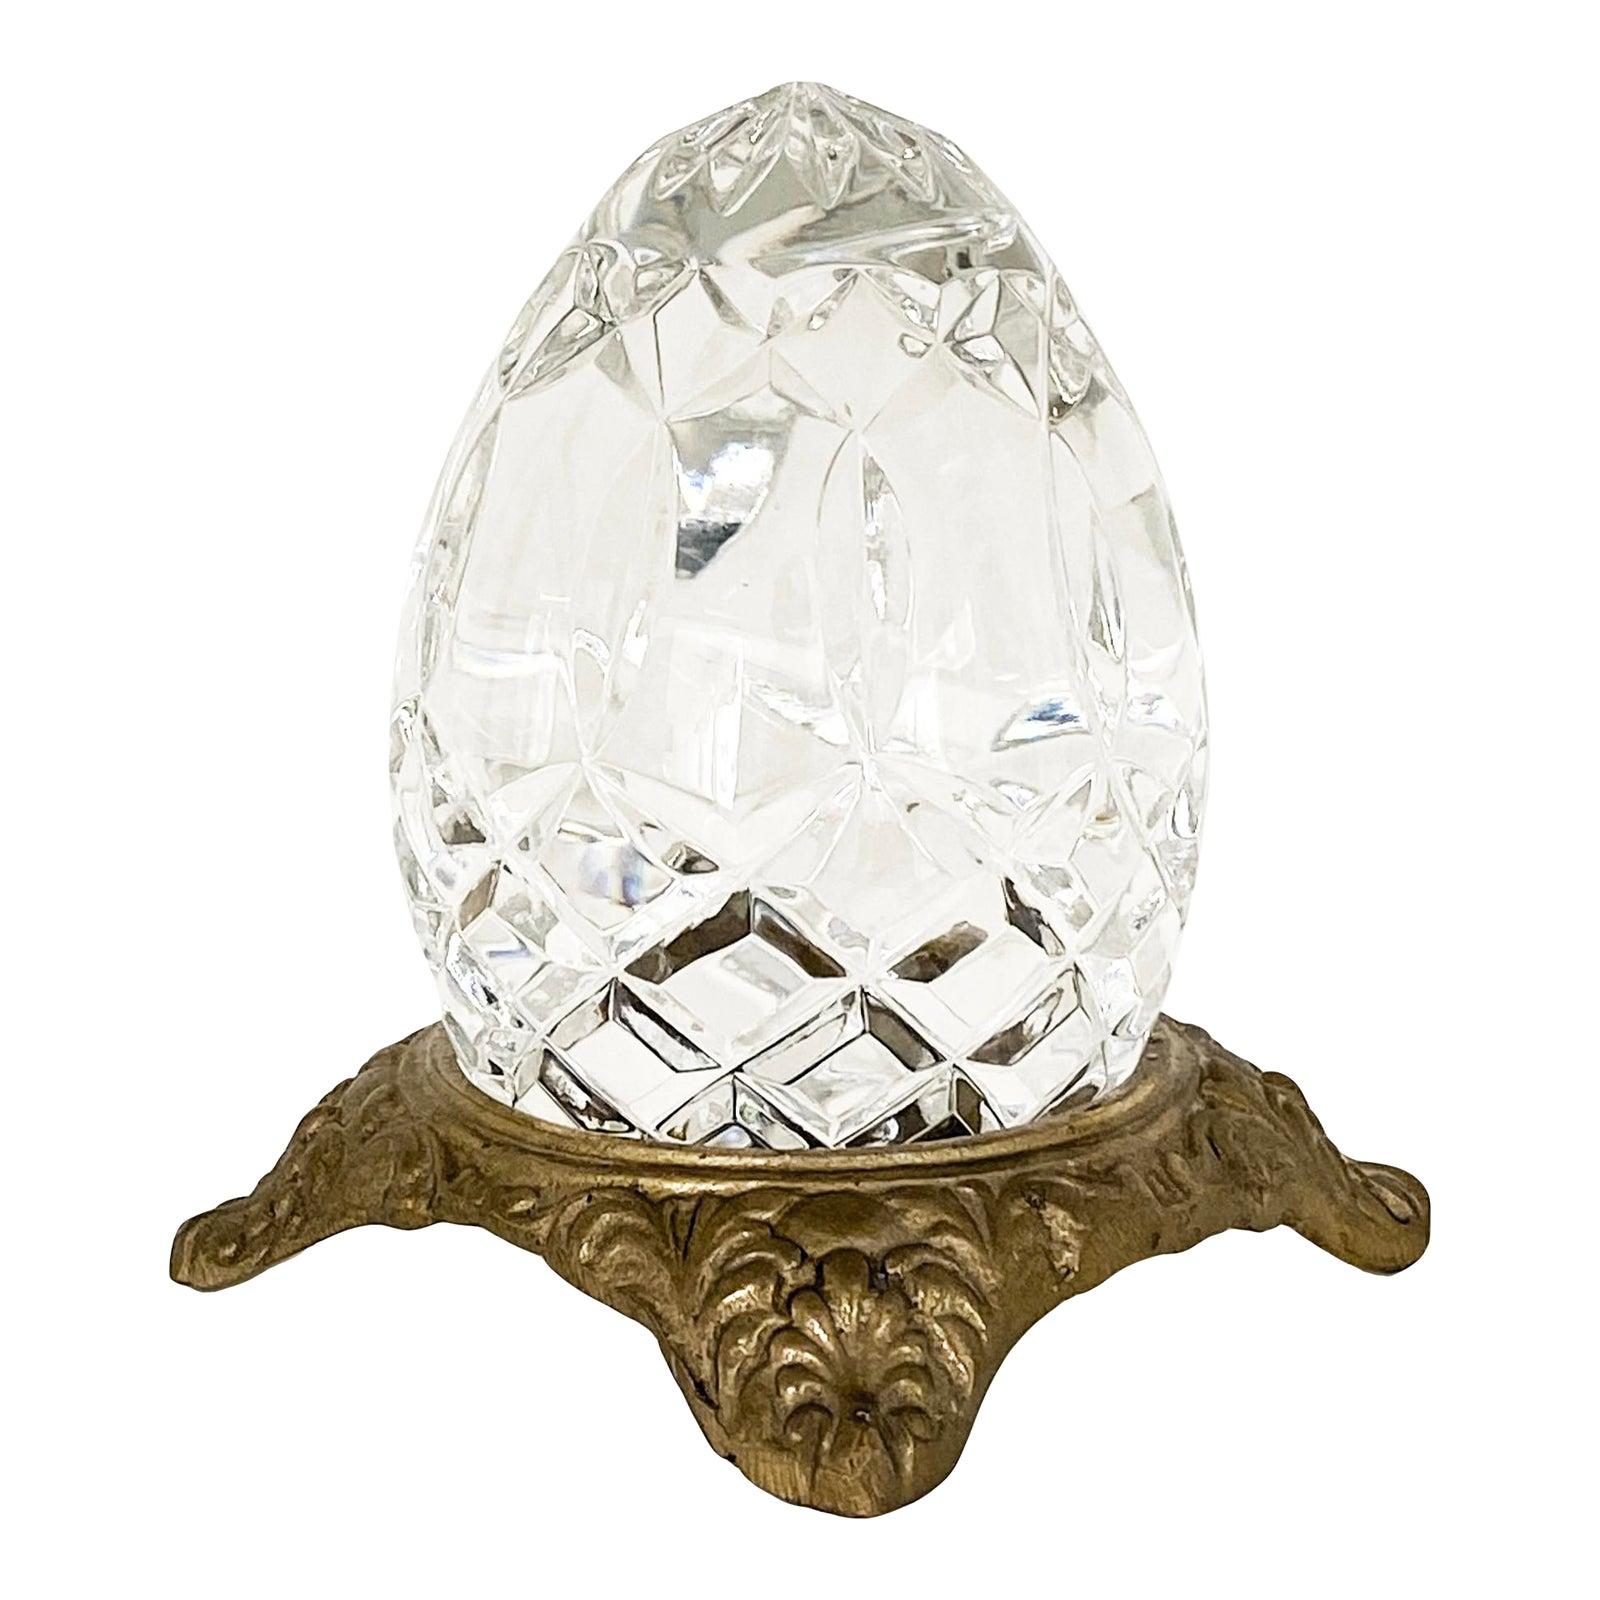 A beautiful crystal glass cut egg-shaped paperweight or decorative item, sitting in a gilt-finished brass stand with ornate detailing. Piece is vintage but in wonderful condition. No scratches or damage to glass.